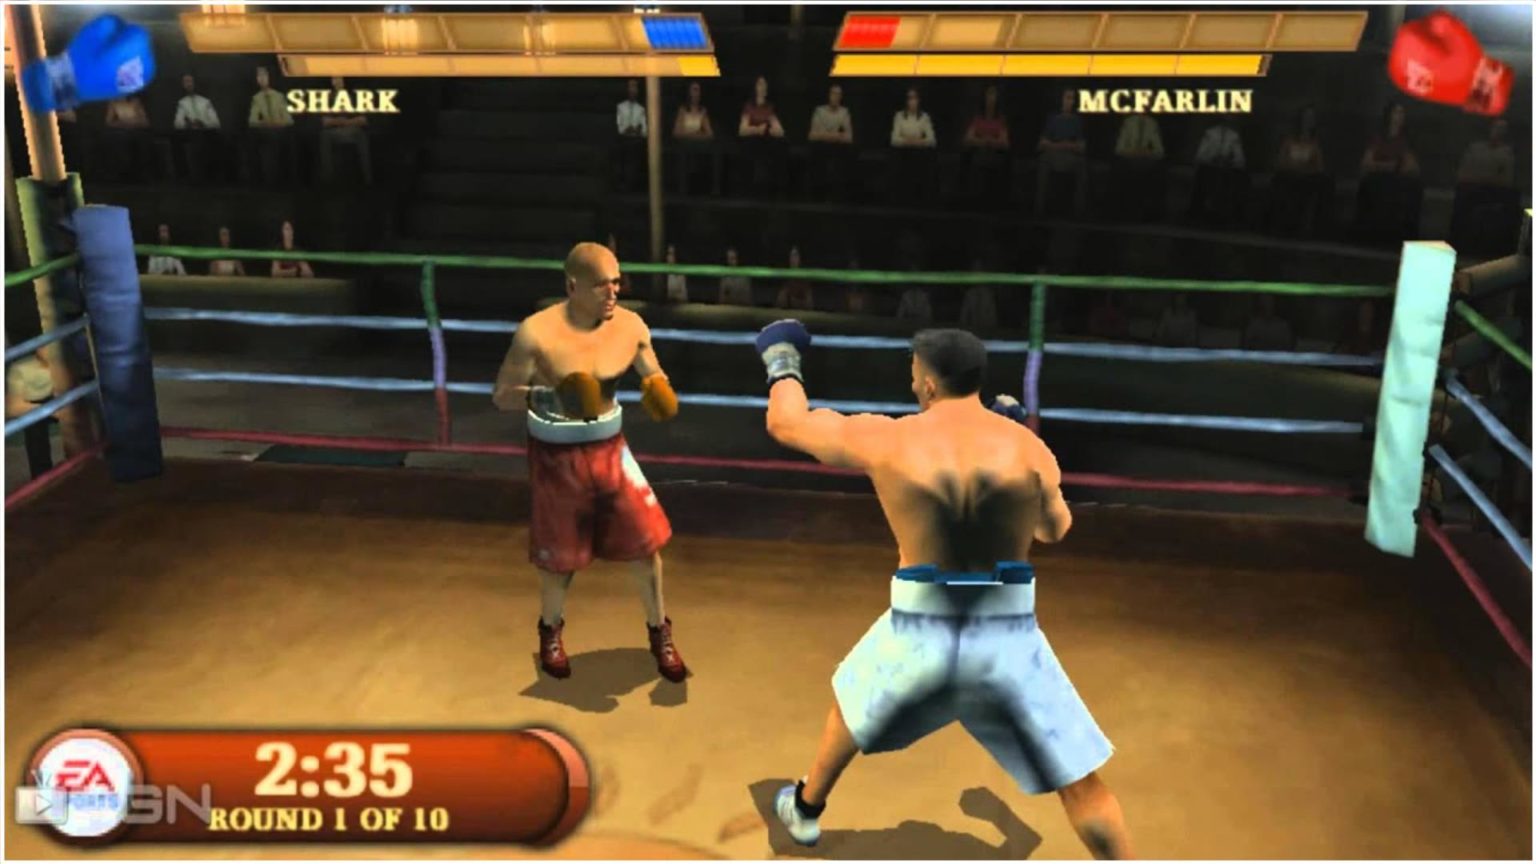 Fight Night Round 3 PSP ISO File Highly Compressed (159mb) With PPSSPP Emulator on Android 2